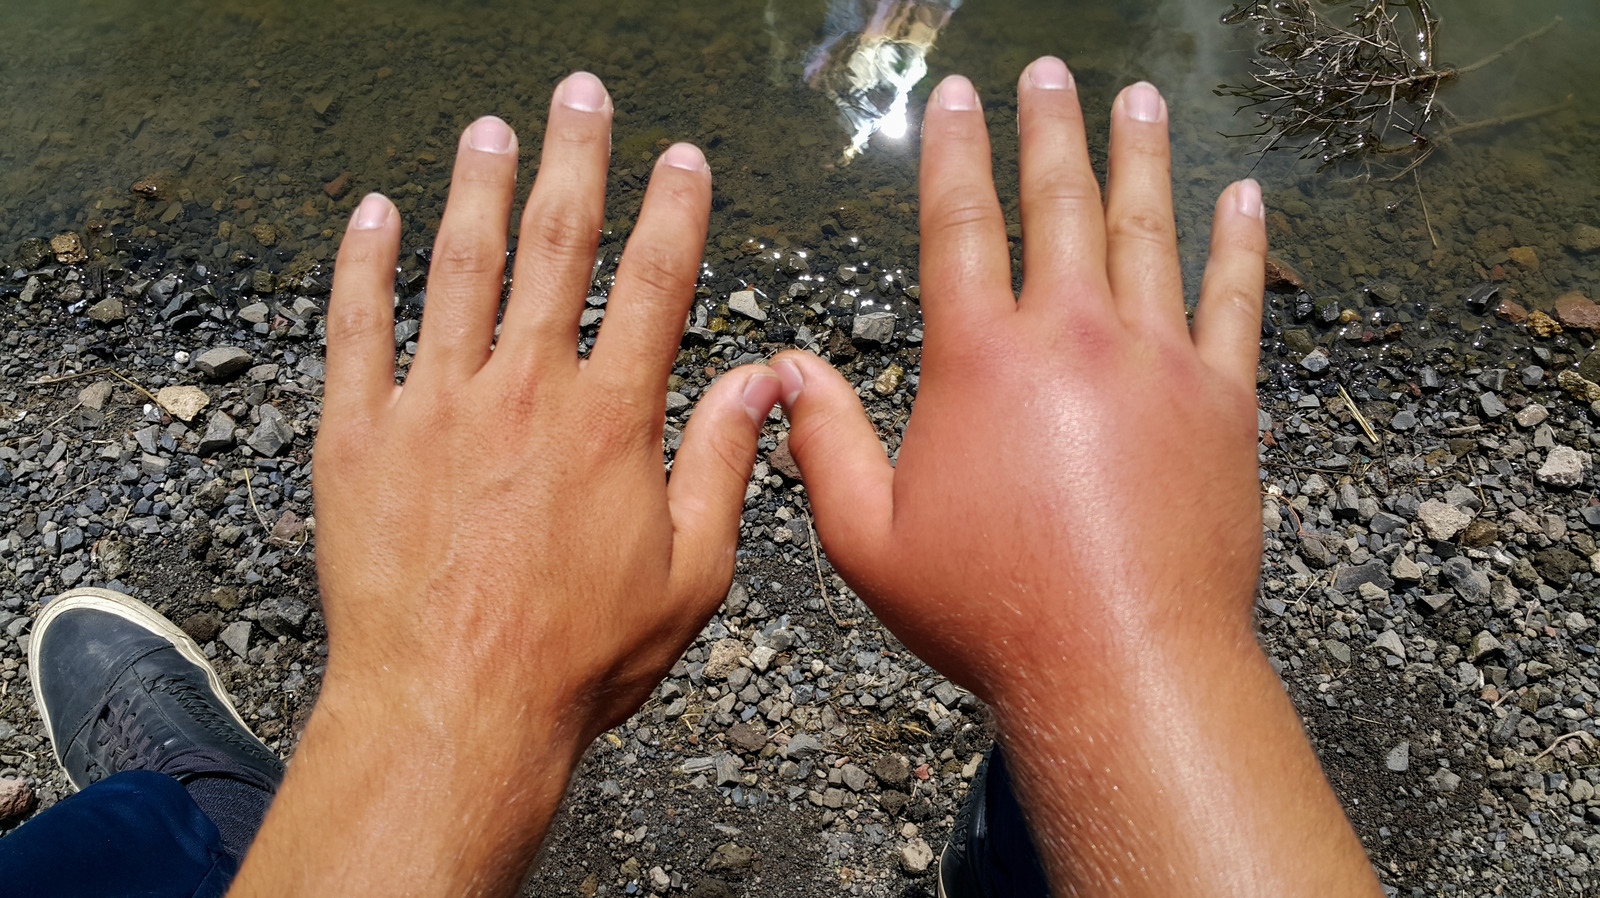 7 Reasons Your Fingers Are Swollen